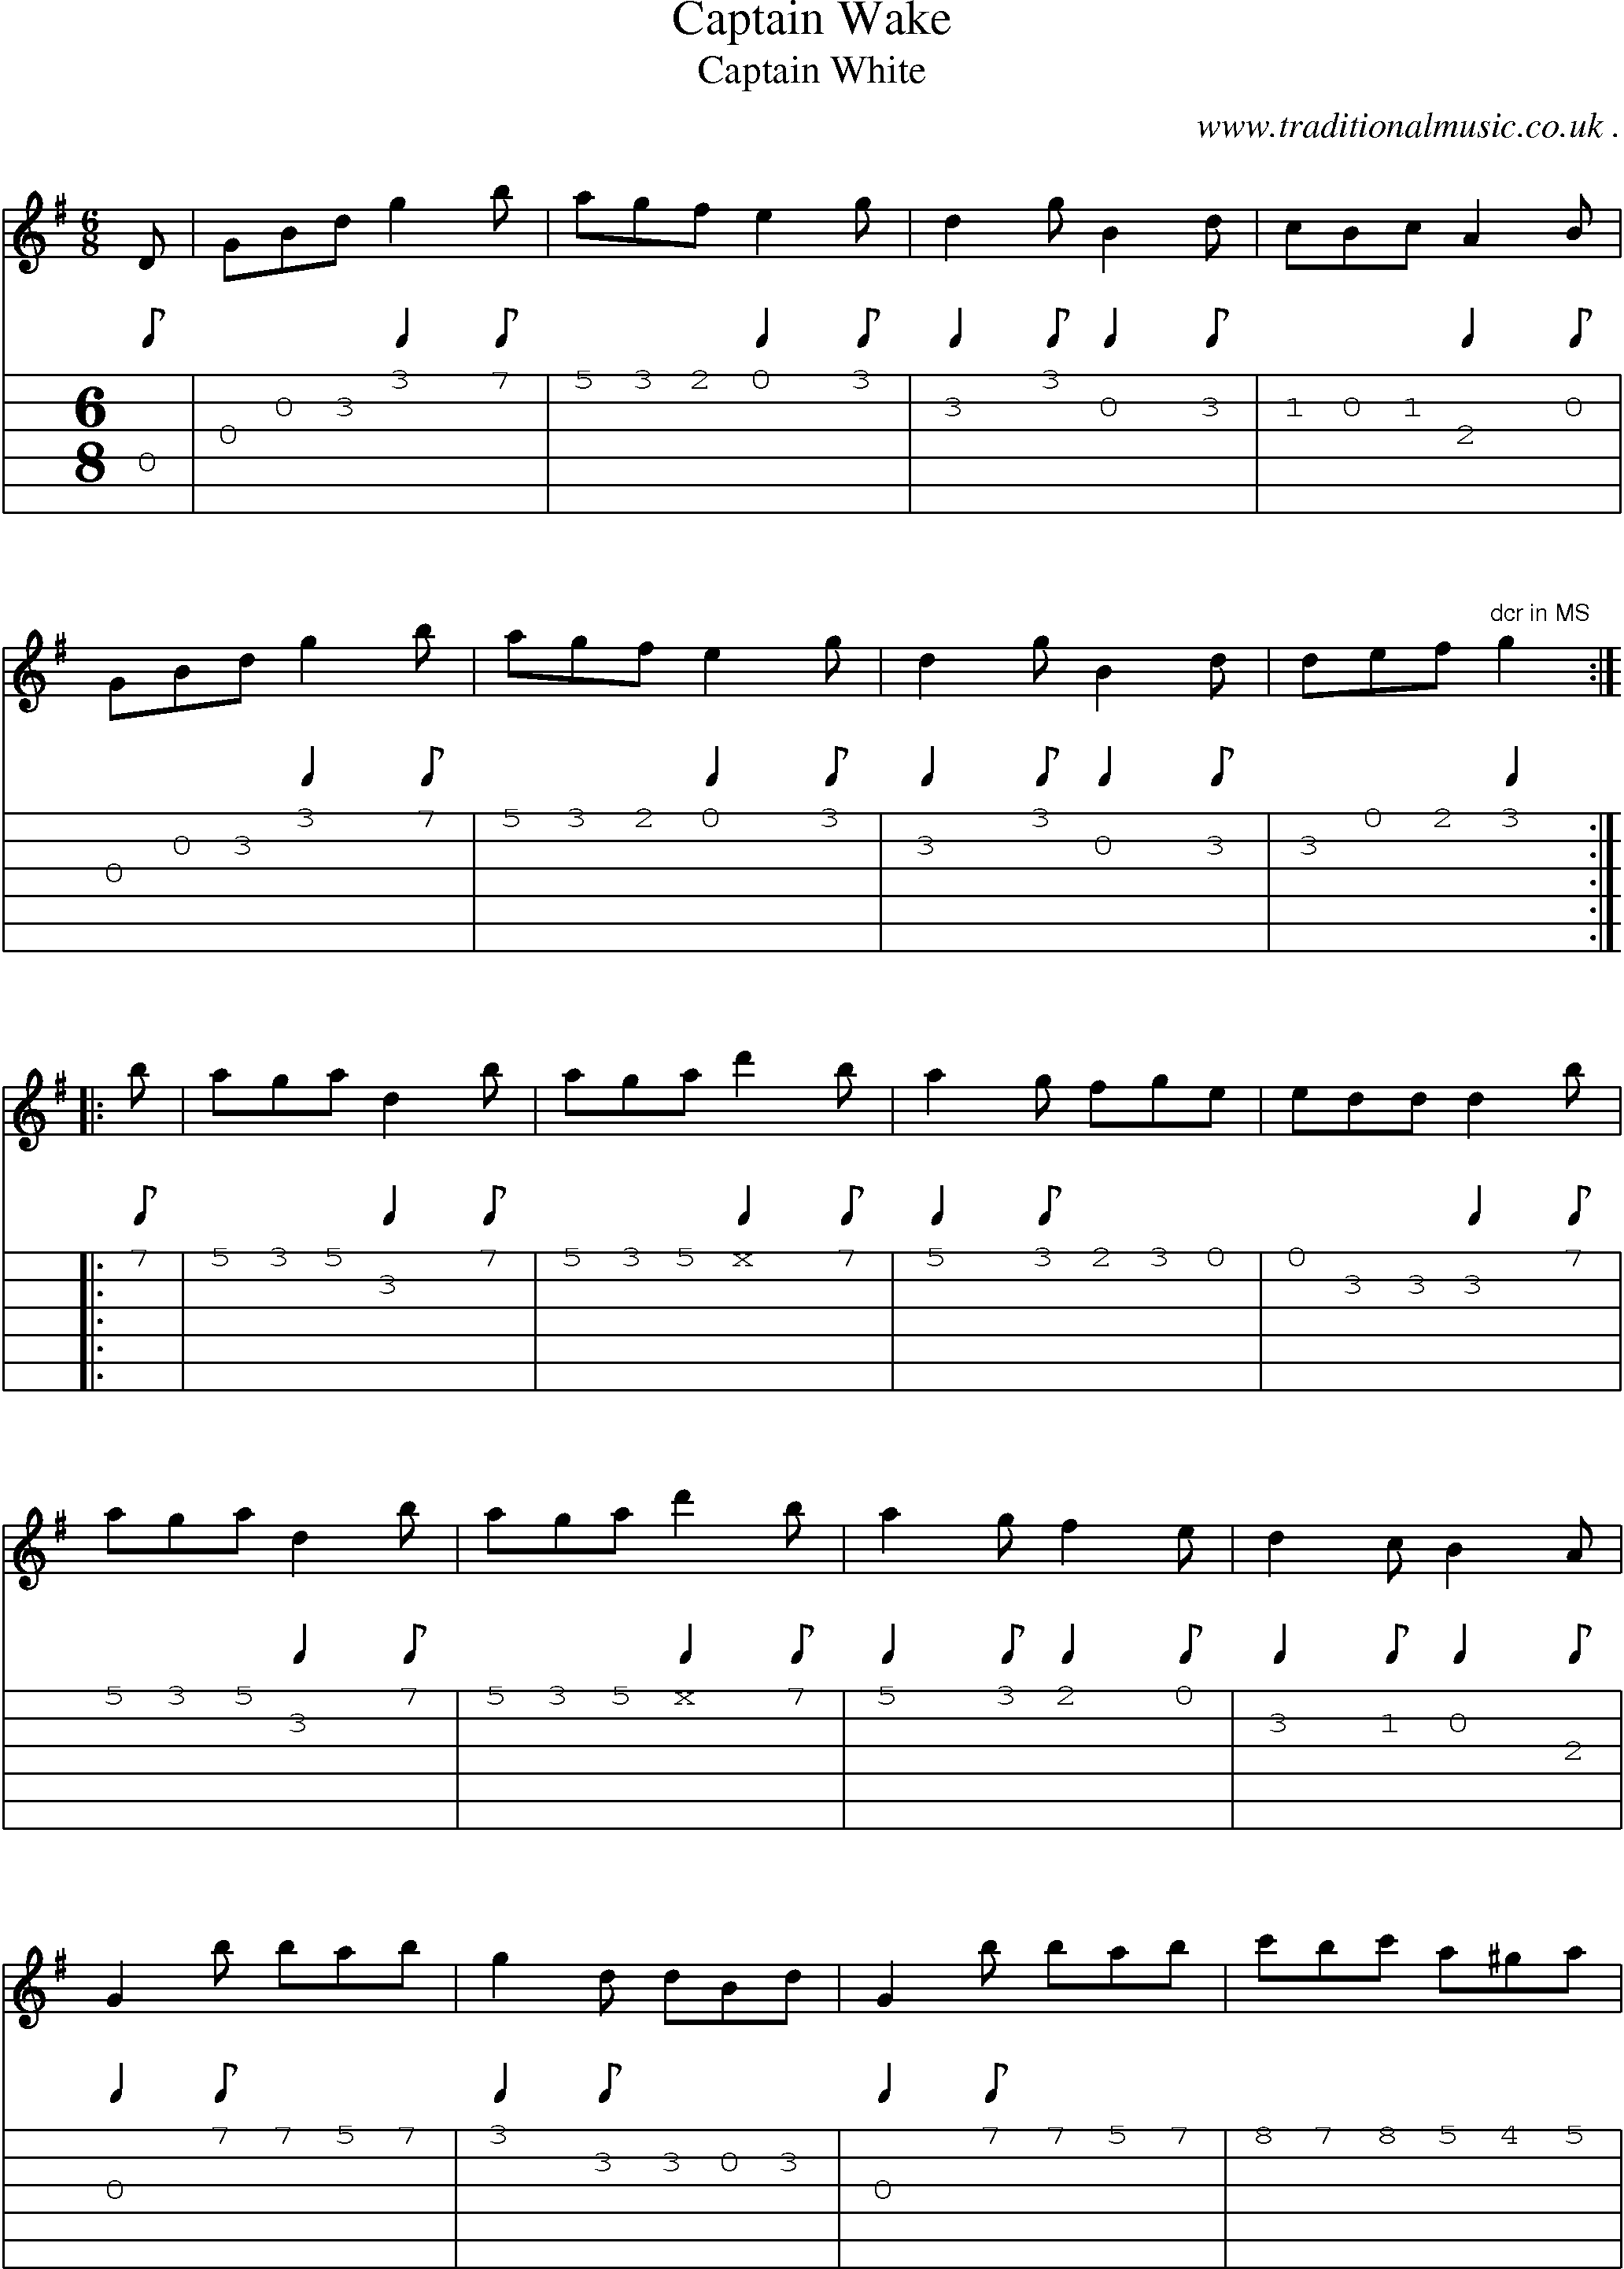 Sheet-Music and Guitar Tabs for Captain Wake